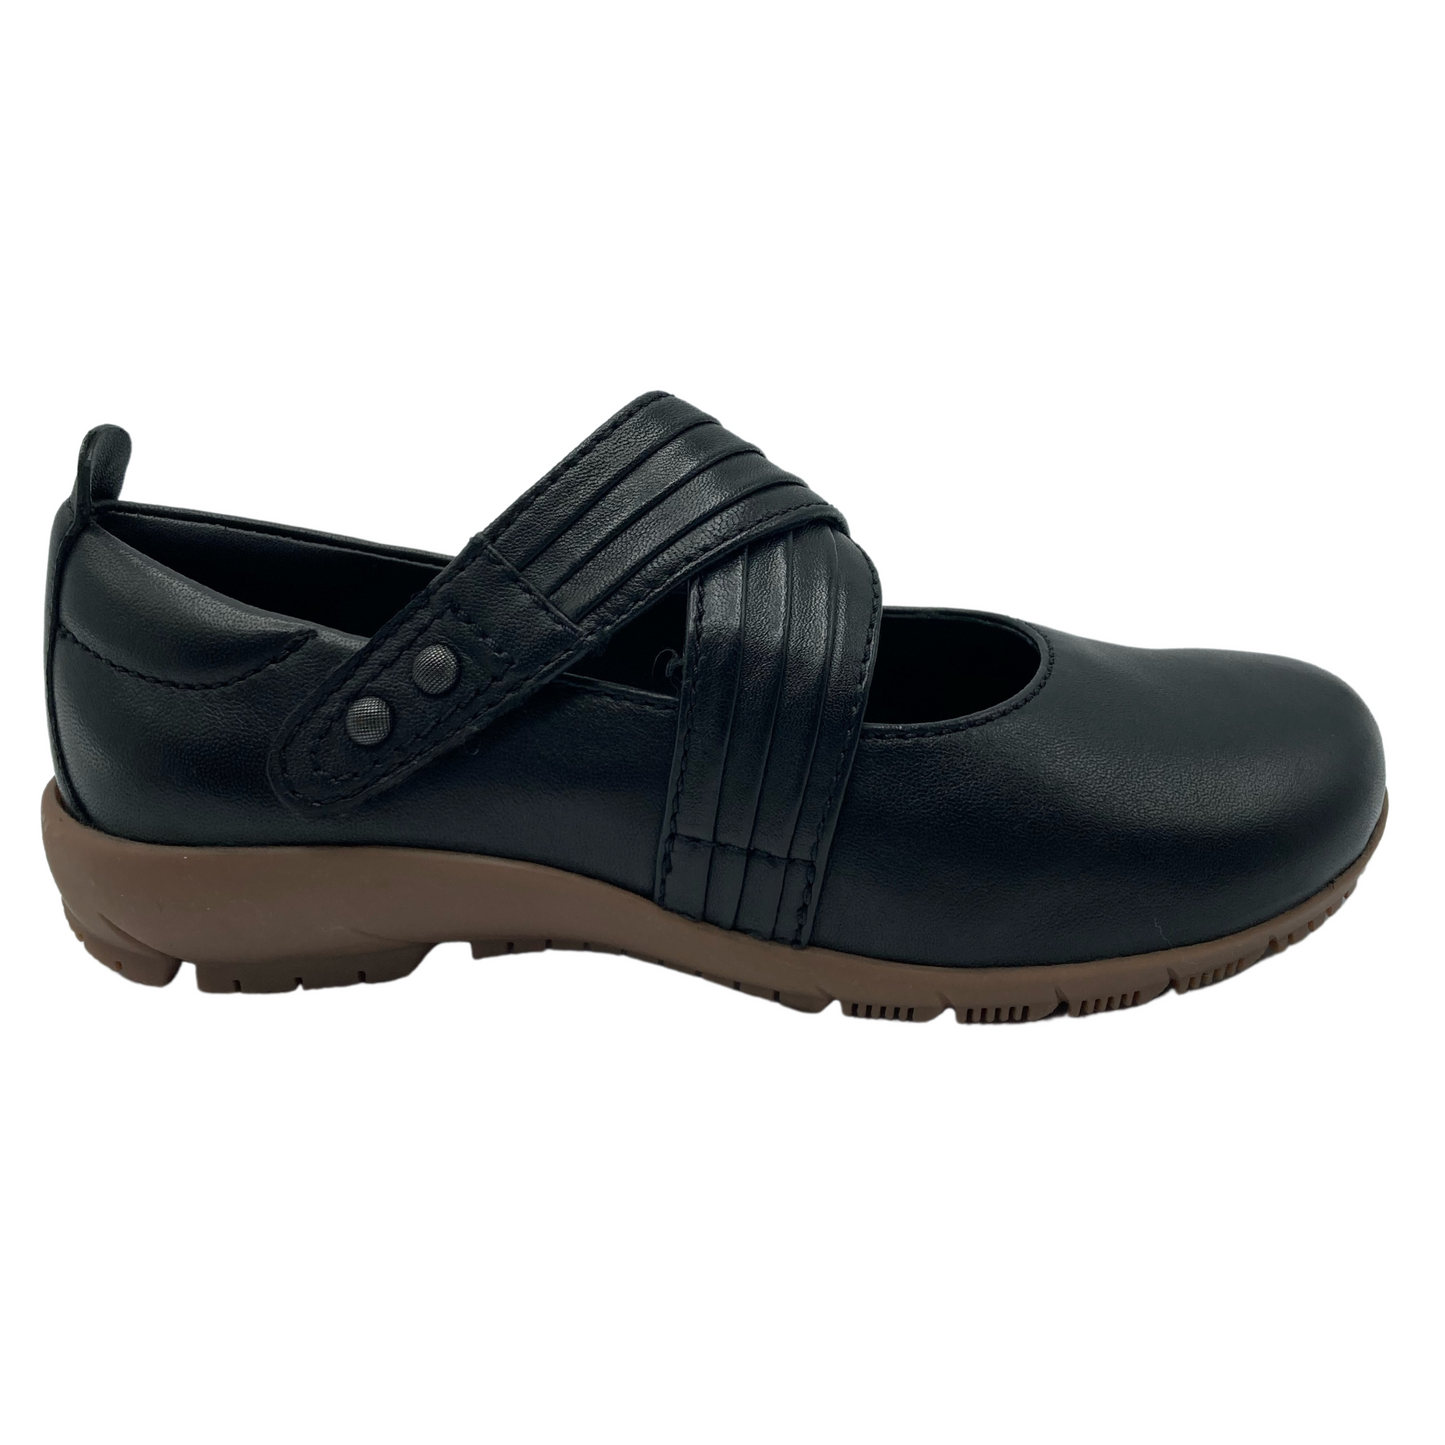 Right facing view of black leather mary janes with double straps on upper